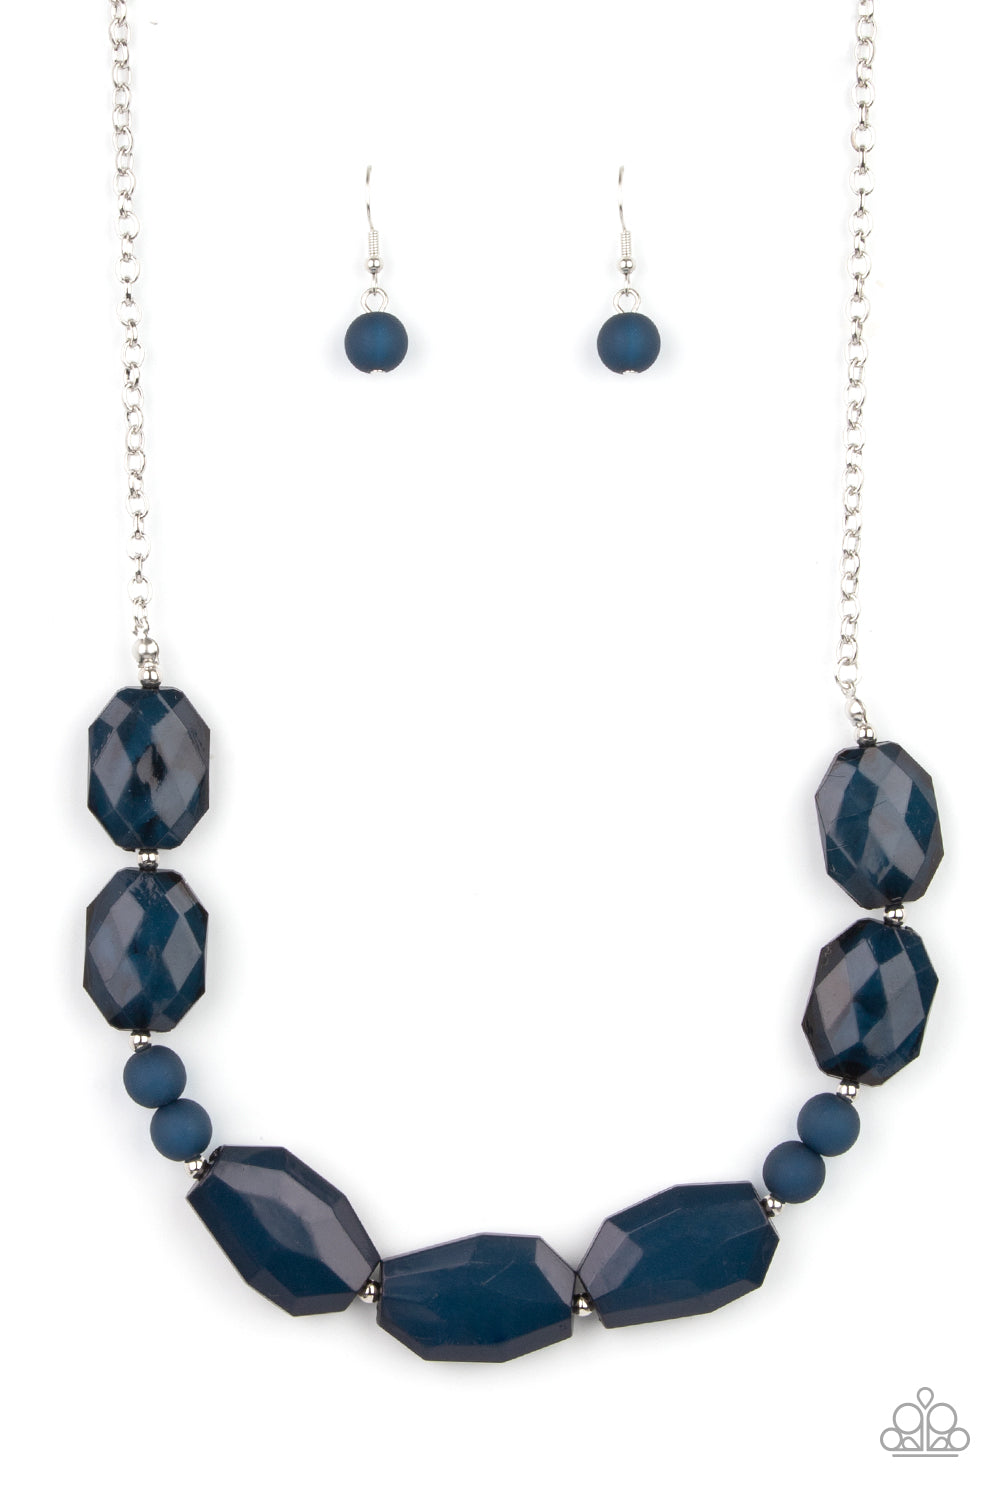 Paparazzi Accessories - Melrose Melody - Blue Necklace